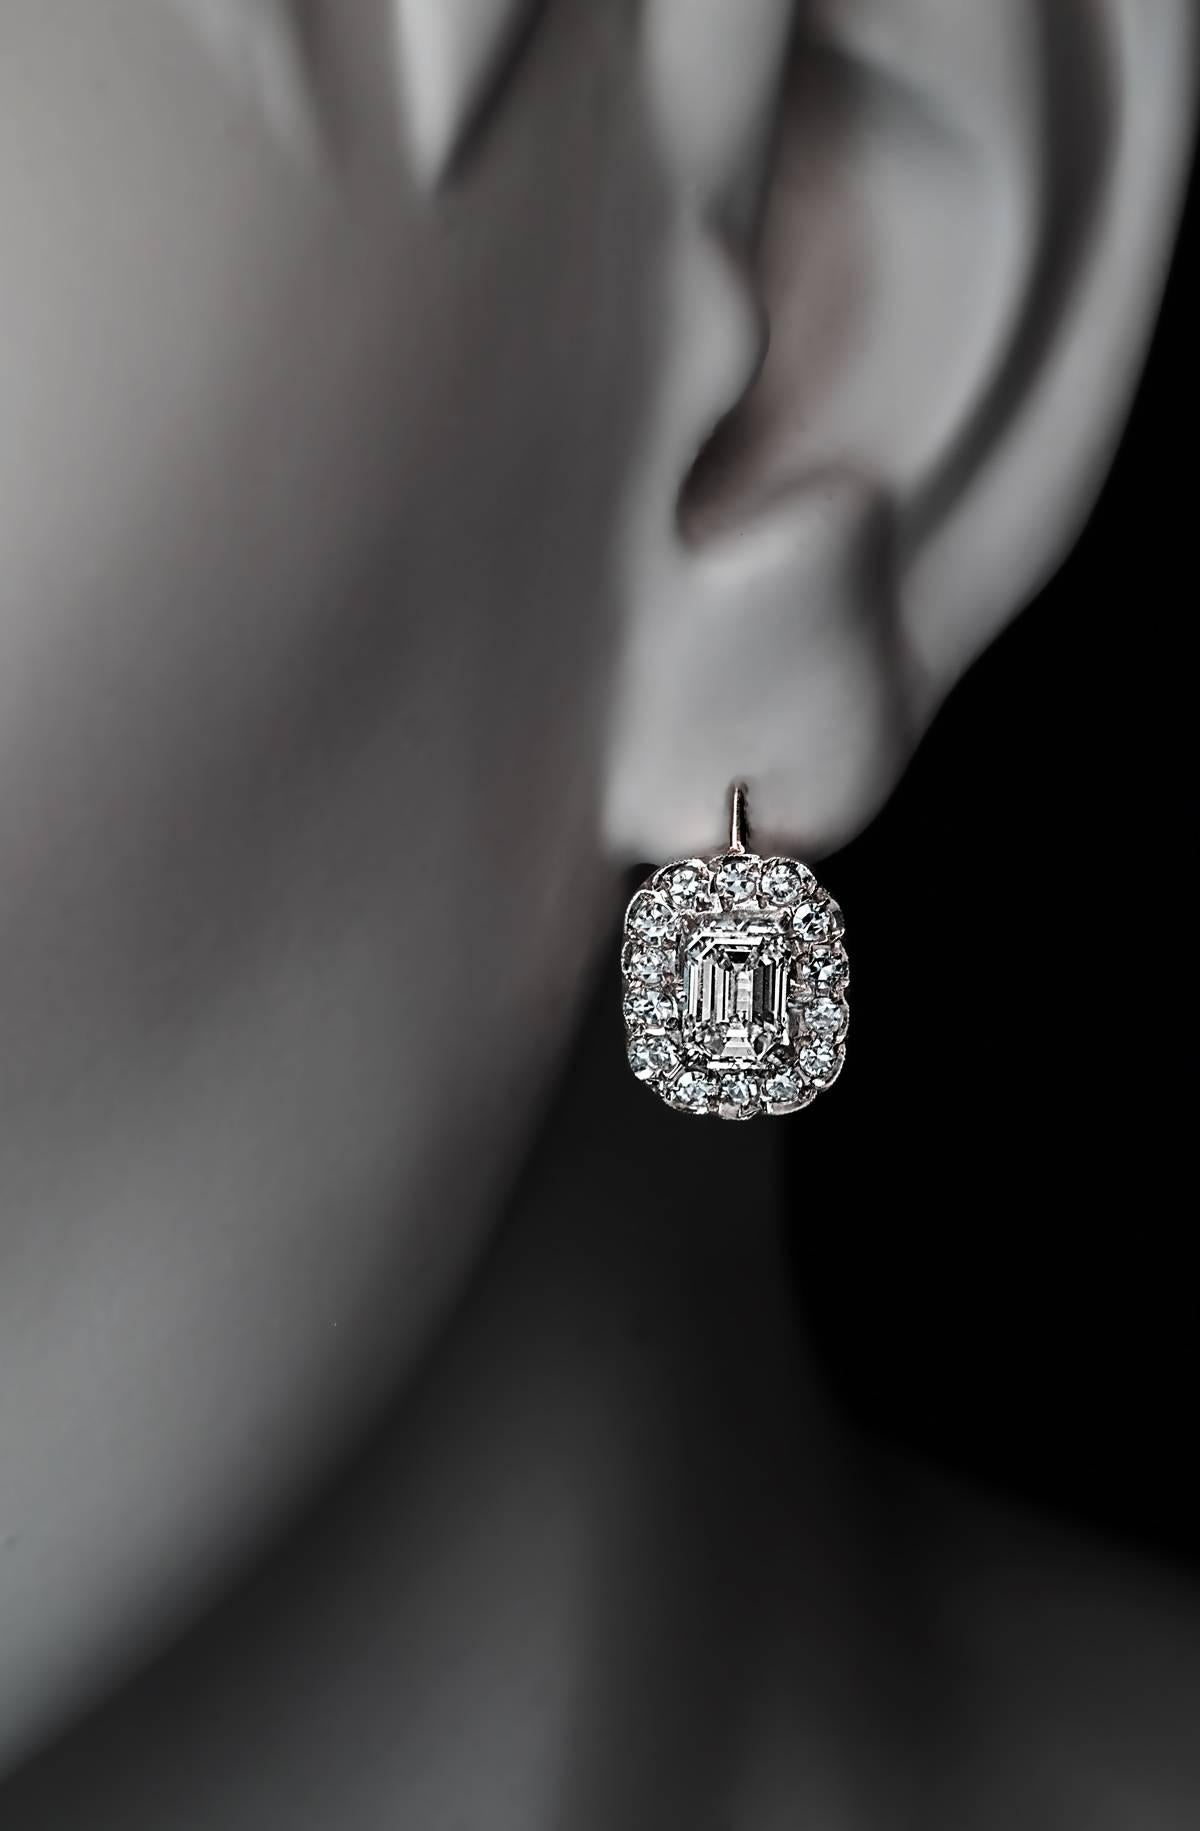 Vintage Soviet Russian diamond cluster earrings, circa 1960s, feature two sparkling emerald cut diamonds: 6.3 x 4.4 x 3.2 mm, approximately 0.78 ct and 6.7 x 4.95 x 3 mm, approximately 0.87 ct, surrounded by single cut diamonds.

Estimated total